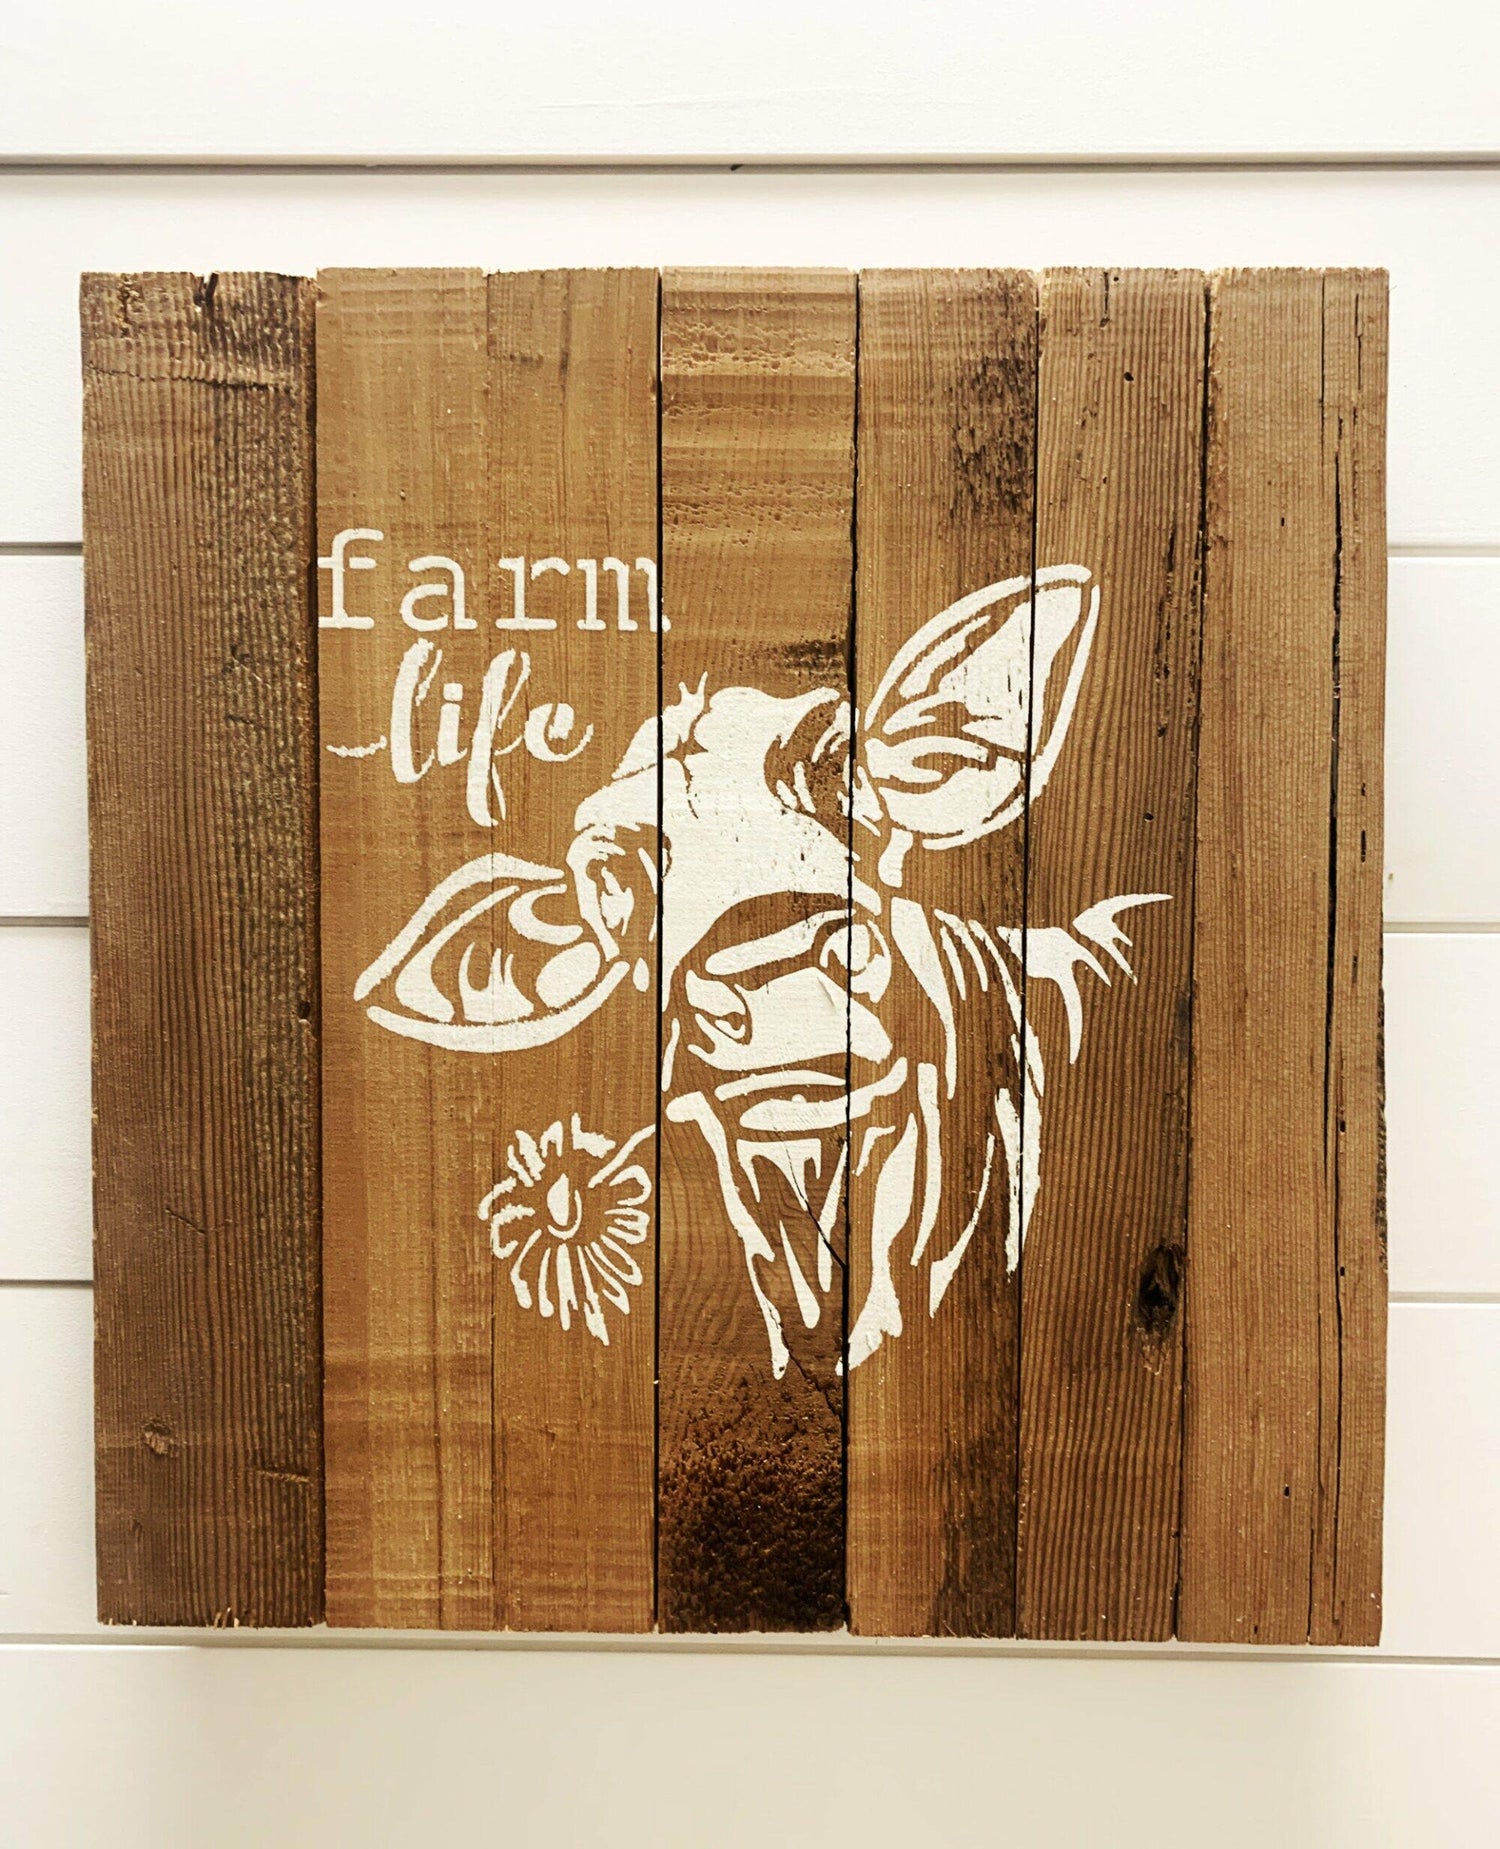 stamped paint design centered on natural and reclaimed barnwood strips put together to create a sign. Design reads  Farm Life with a cow holding a flower in its mouth underneath. Wood has distressed characteristics.